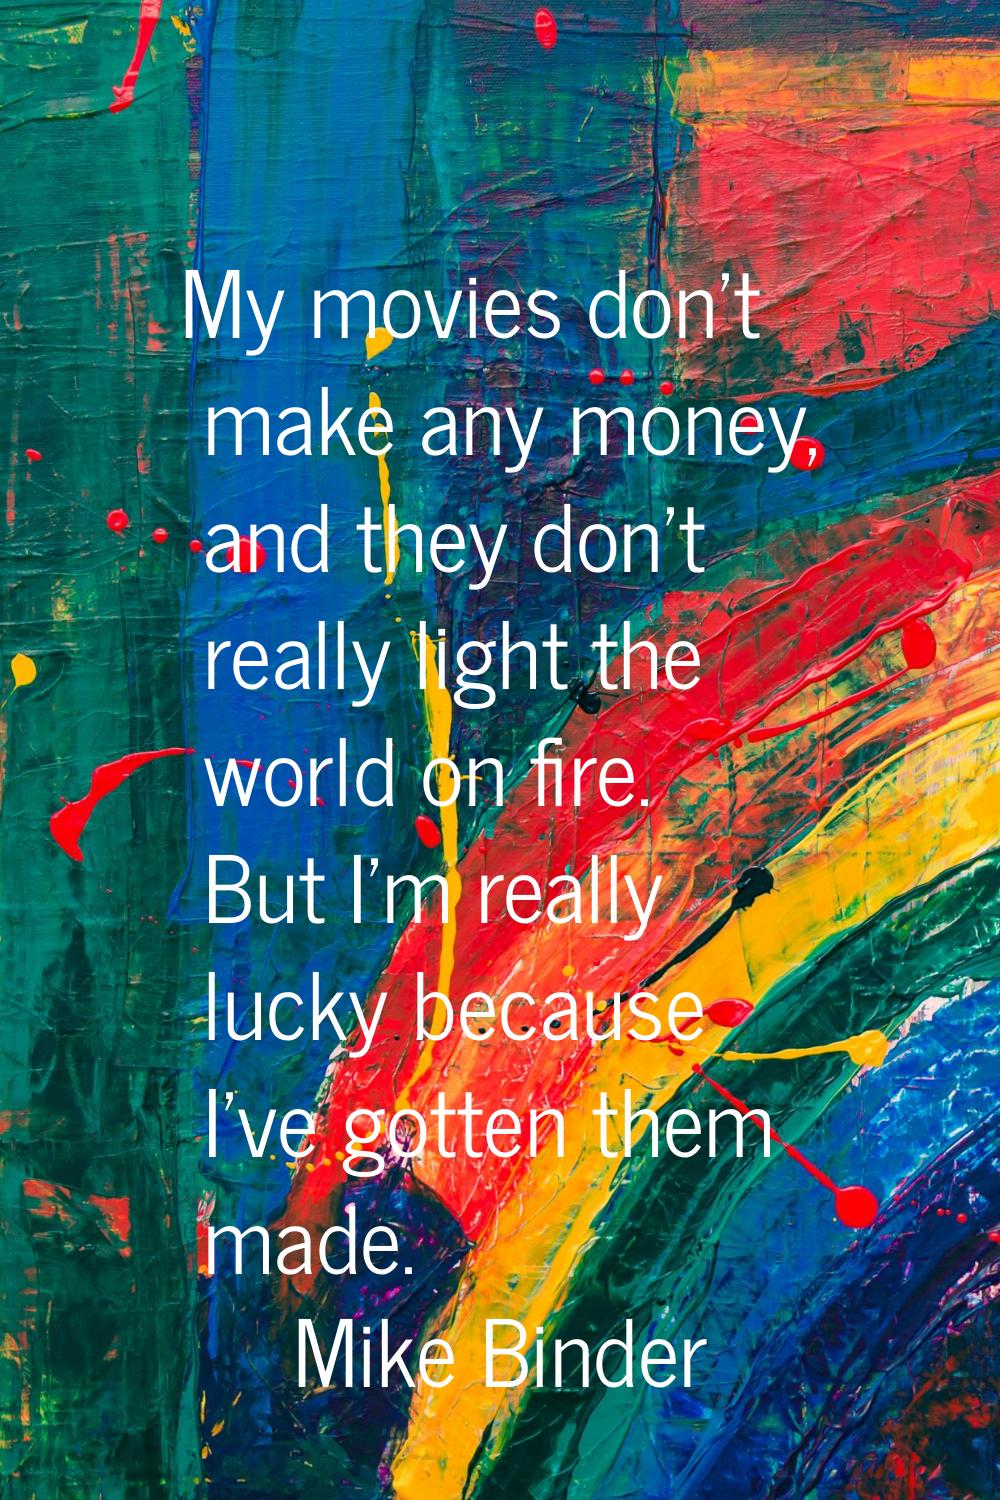 My movies don't make any money, and they don't really light the world on fire. But I'm really lucky